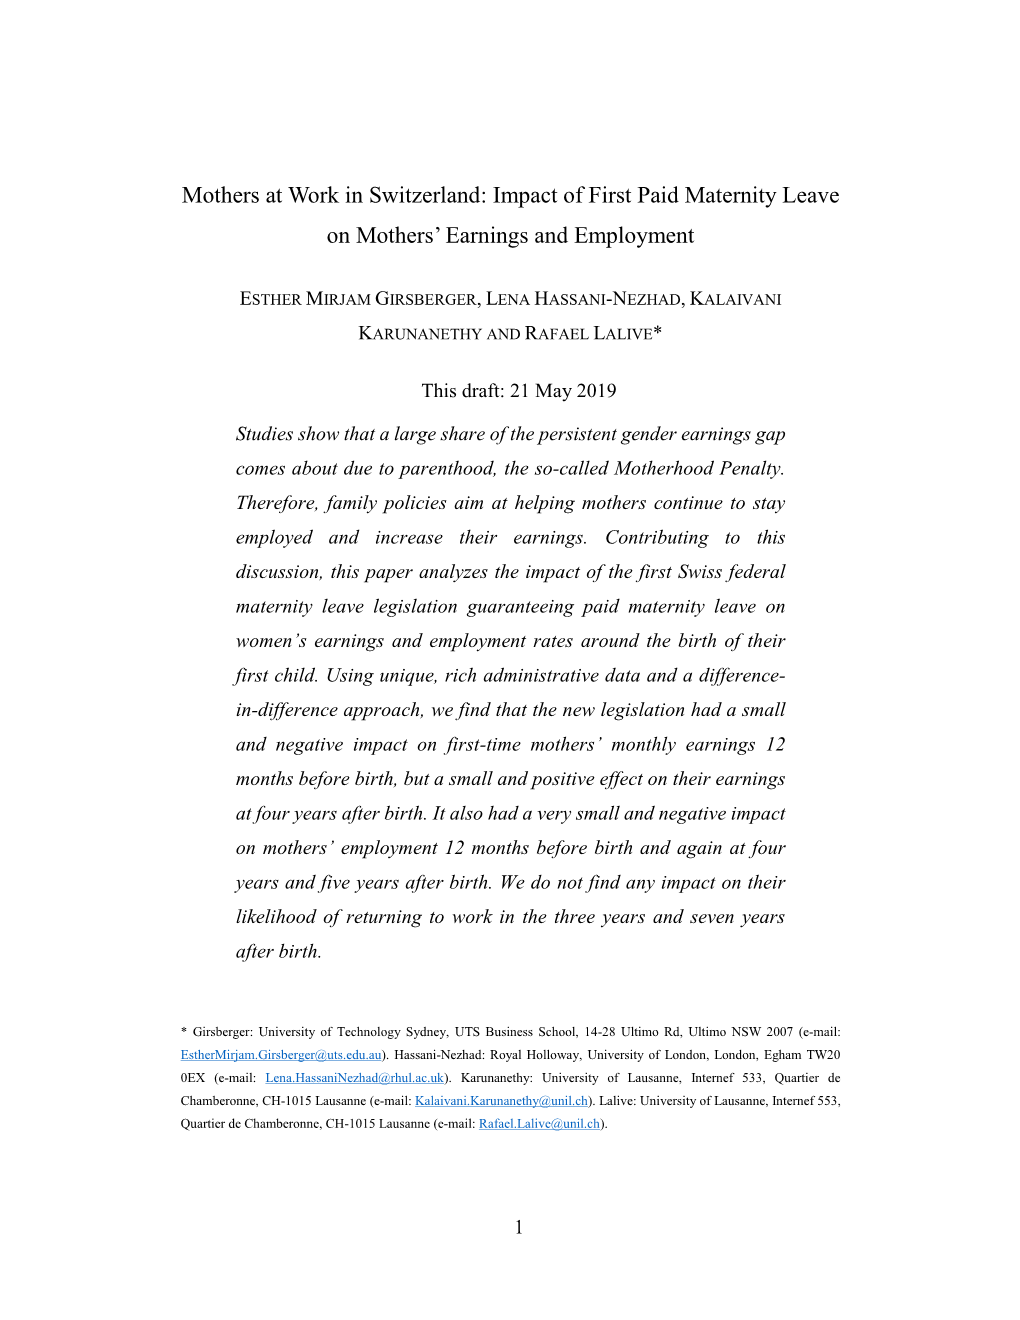 Mothers at Work in Switzerland: Impact of First Paid Maternity Leave on Mothers’ Earnings and Employment